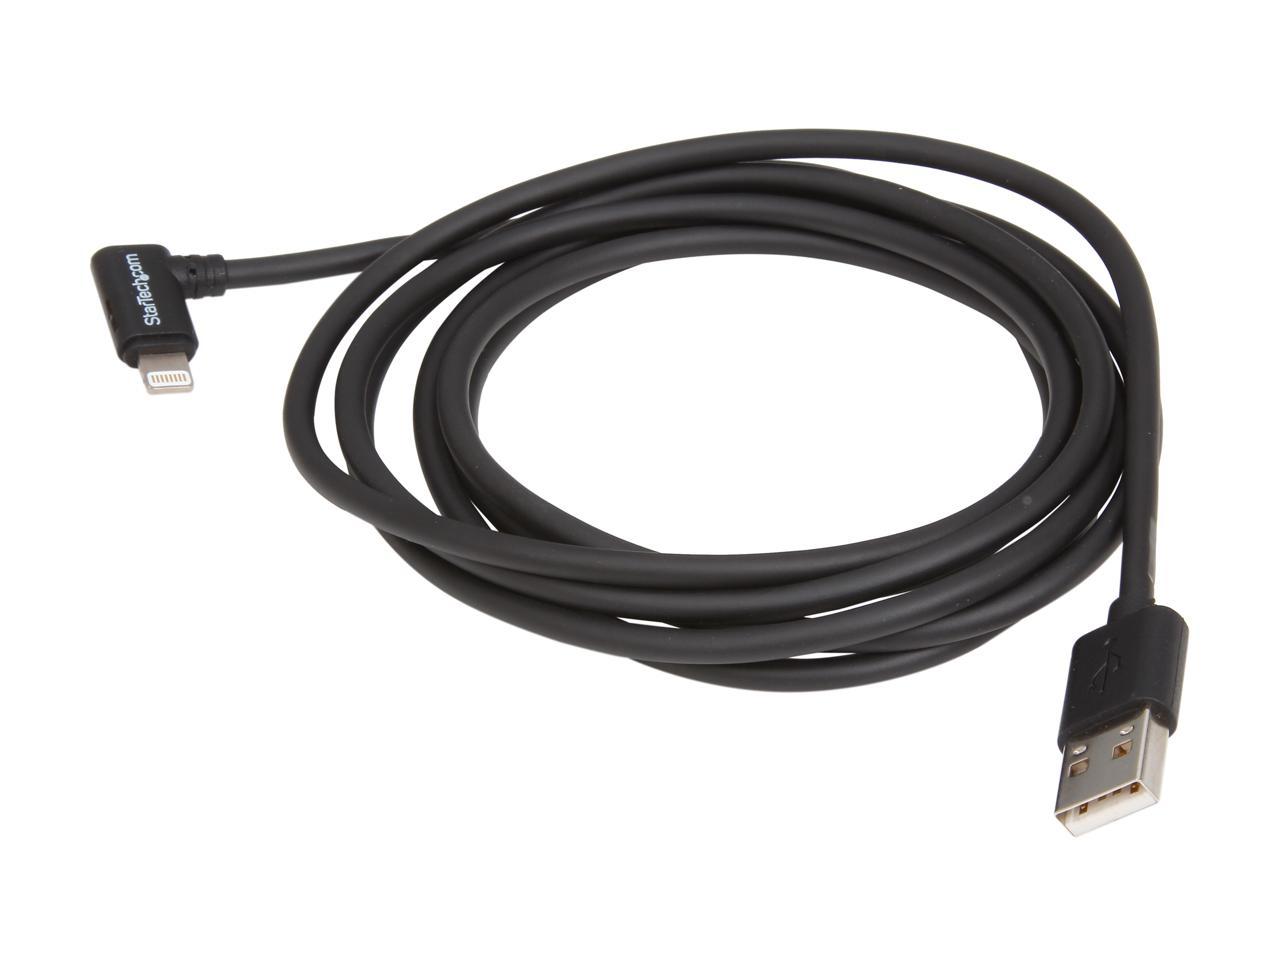 StarTech.com USBLT2MBR Black Angled Black Apple 8-pin Lightning Connector to USB Cable for iPhone / iPod / iPad